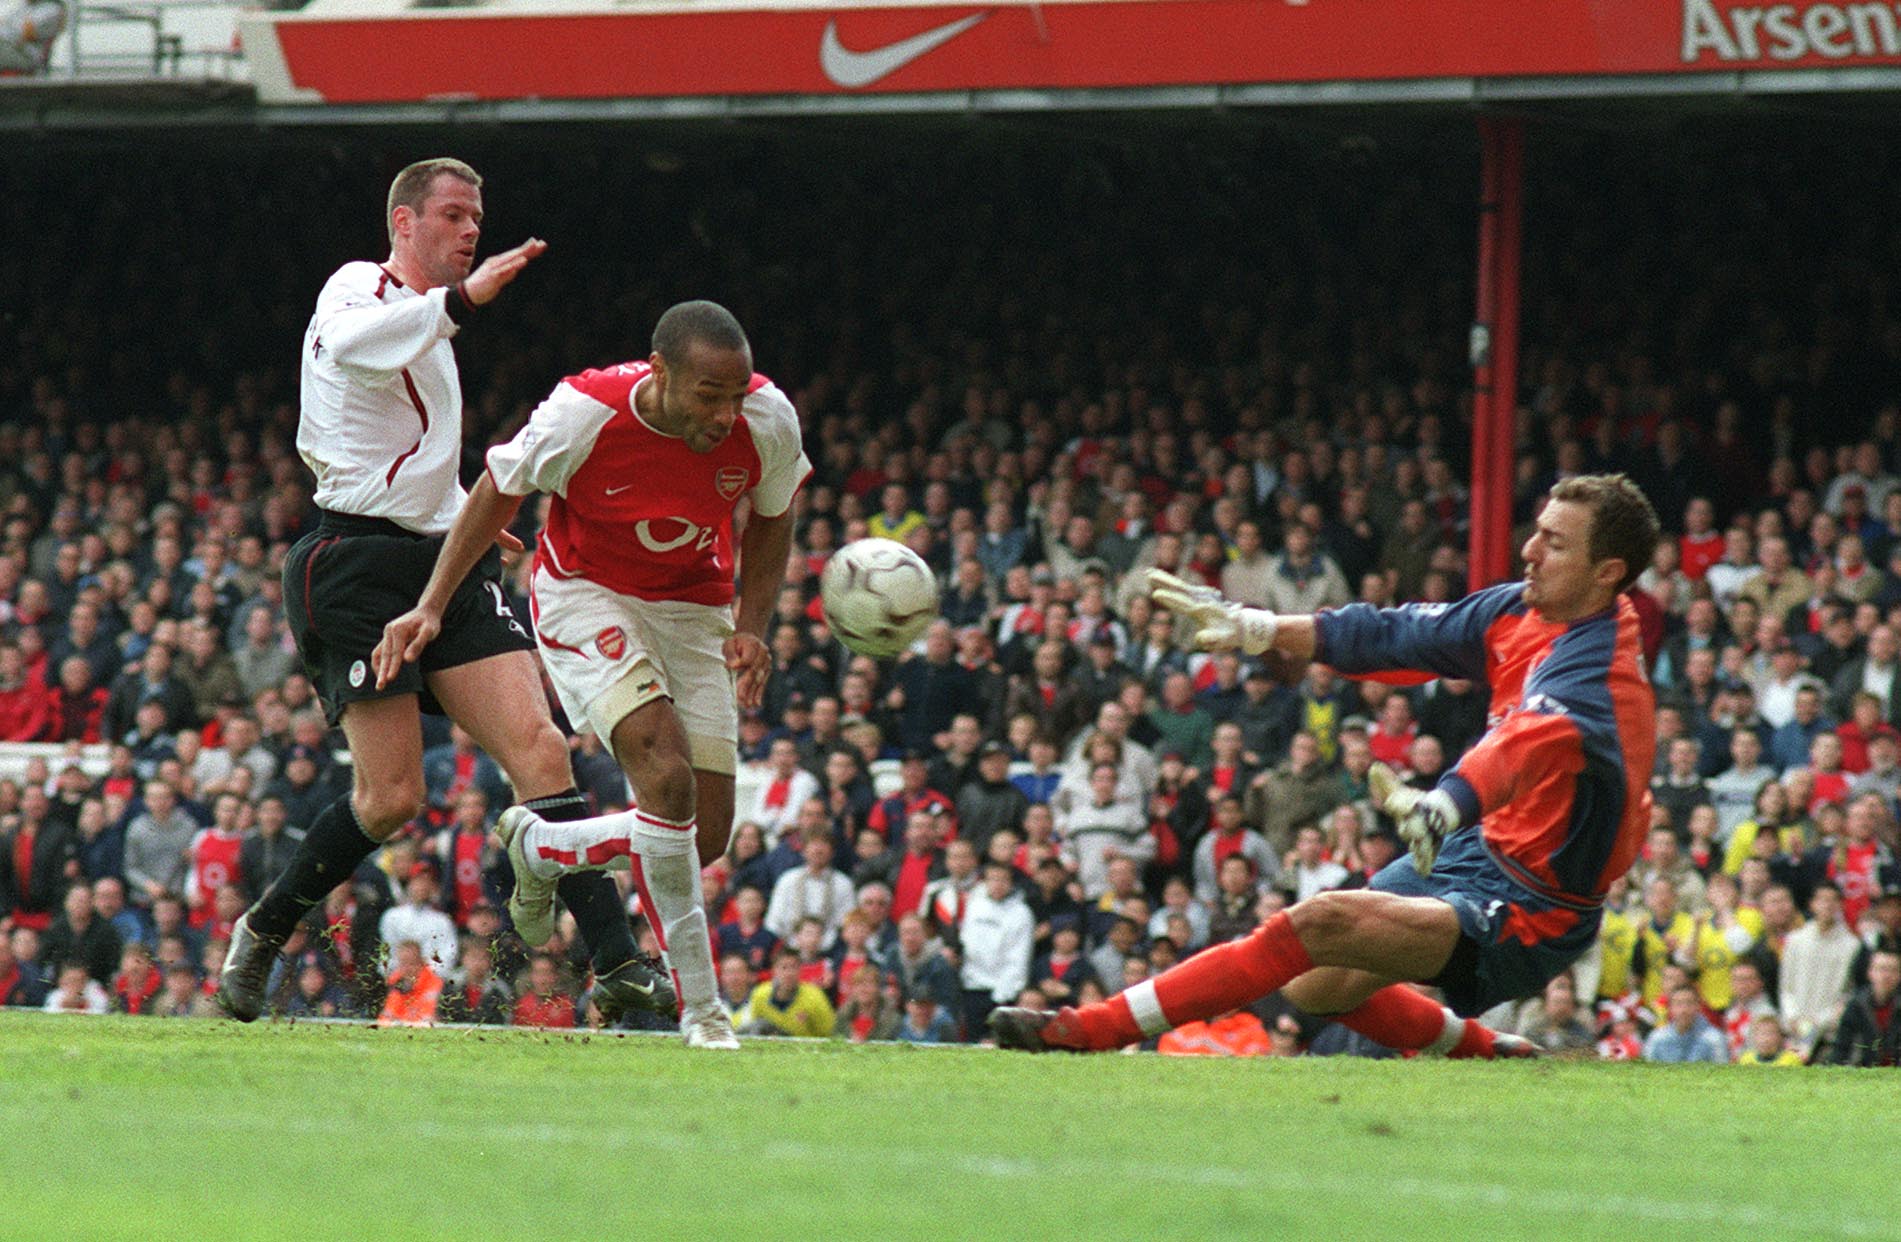 MEMORABLE MATCH On this day in 2004 Arsenal beat Liverpool in one of the most memorable